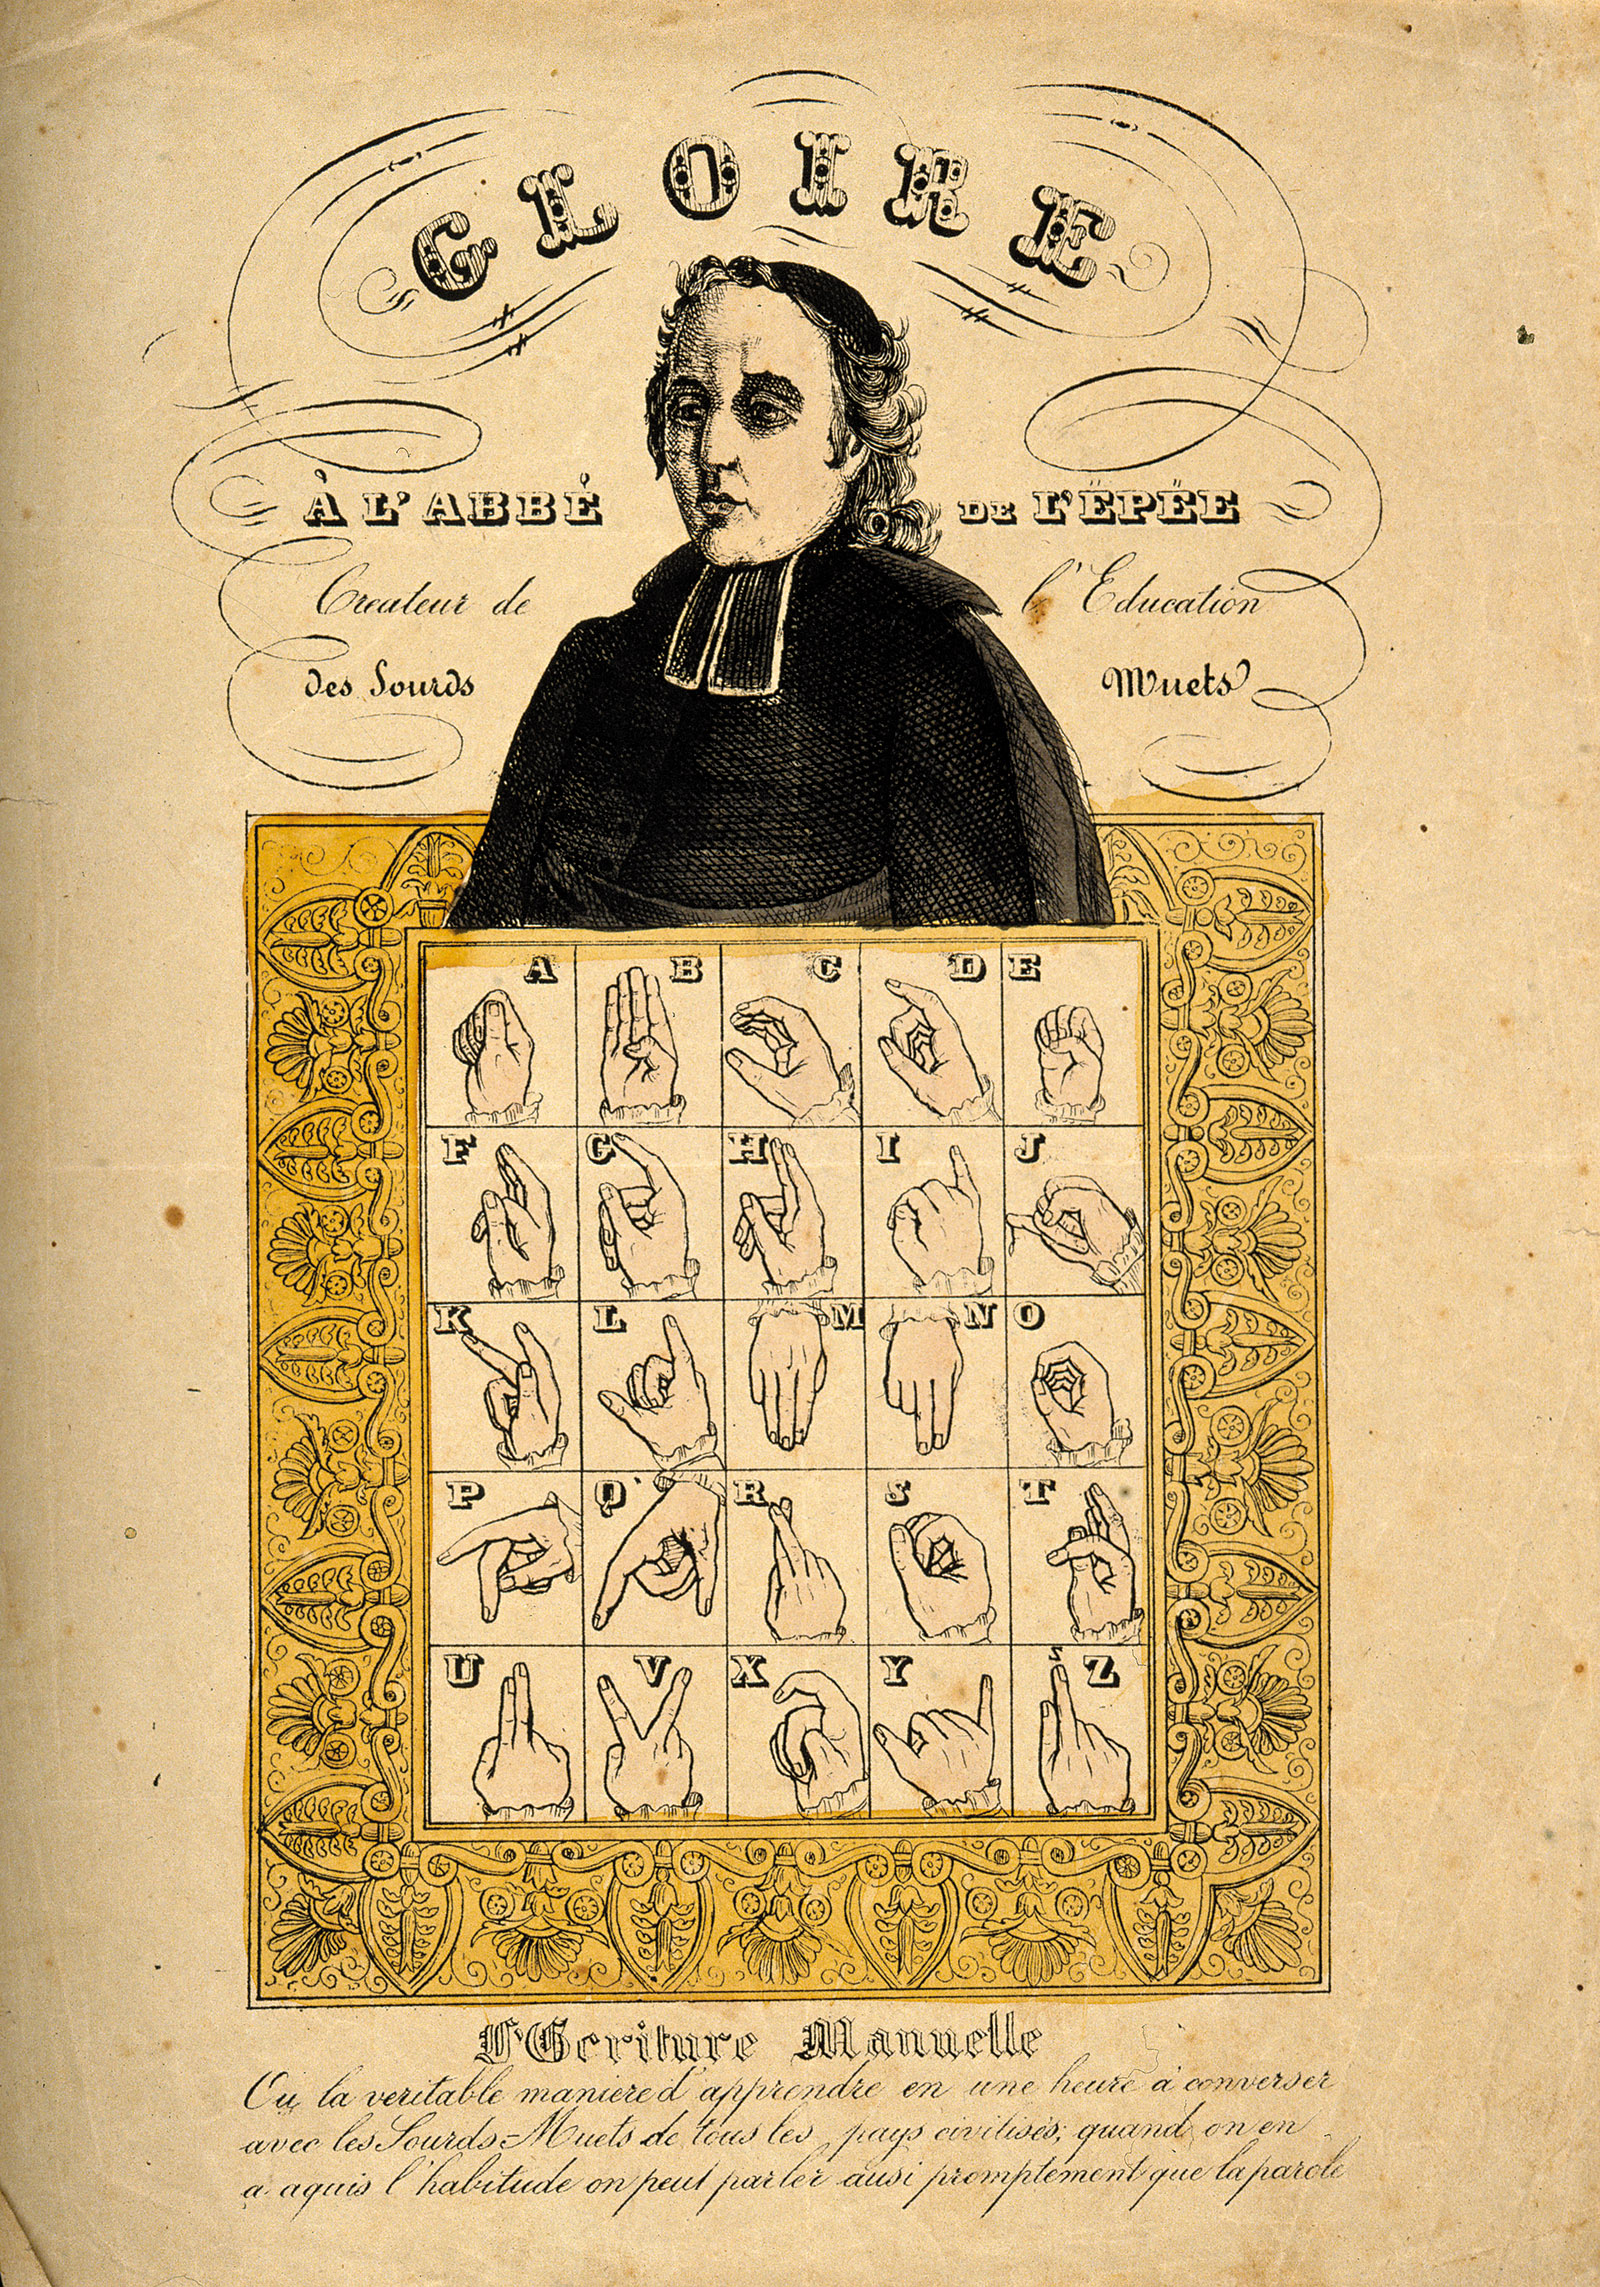 The Abbé de l’Épée, who founded a school for the deaf in Paris in 1755 and was the first to recognize that they could be taught with sign language